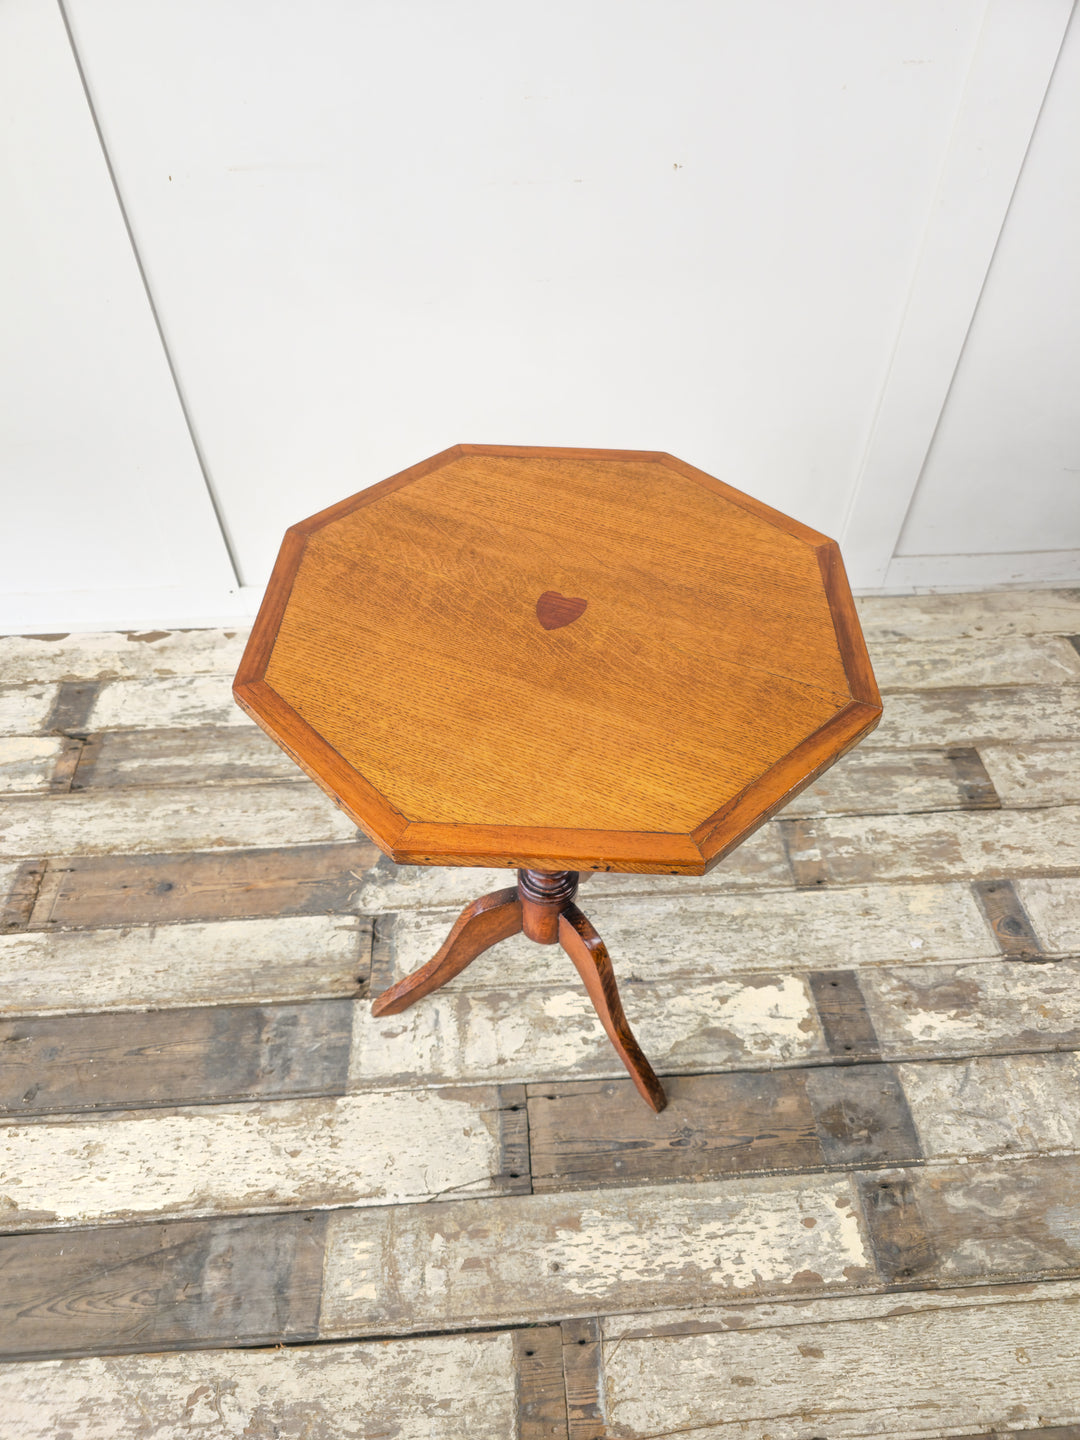 Arts and Crafts Oak Tripod Table, 19th Century